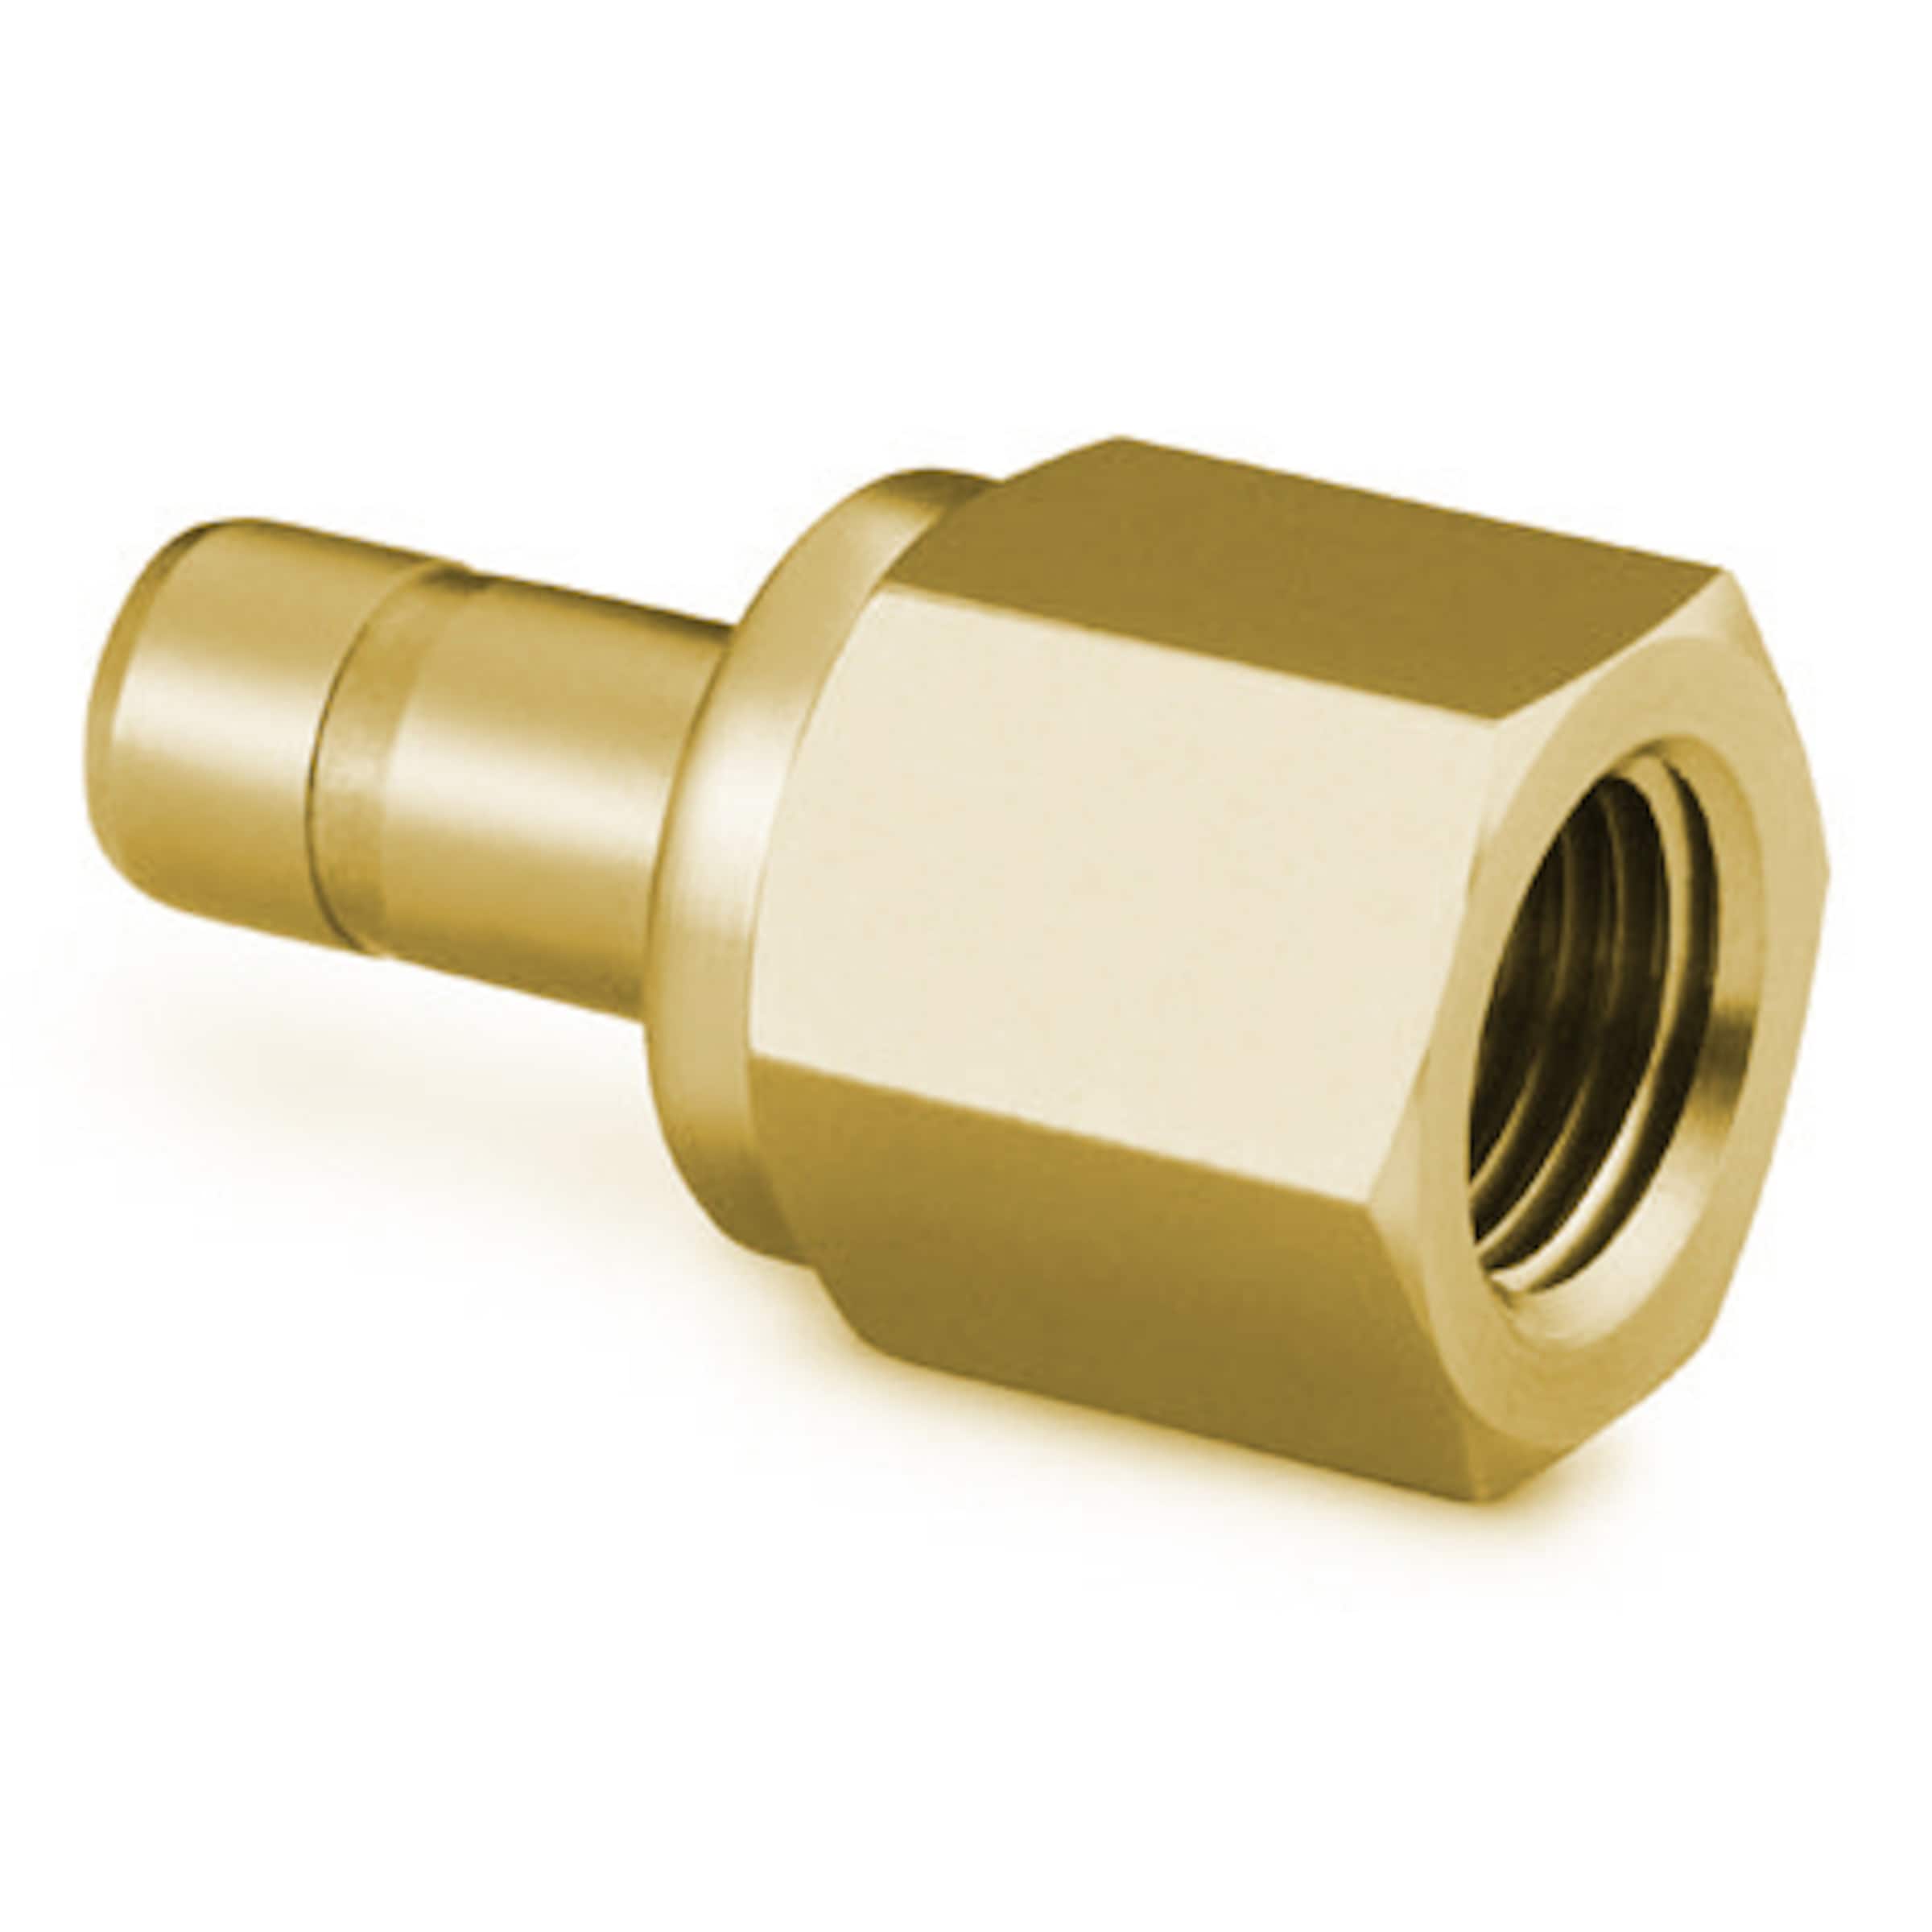 7/8 OD Compression Tube to 3/4 Male Npt Adapter Fitting Connector